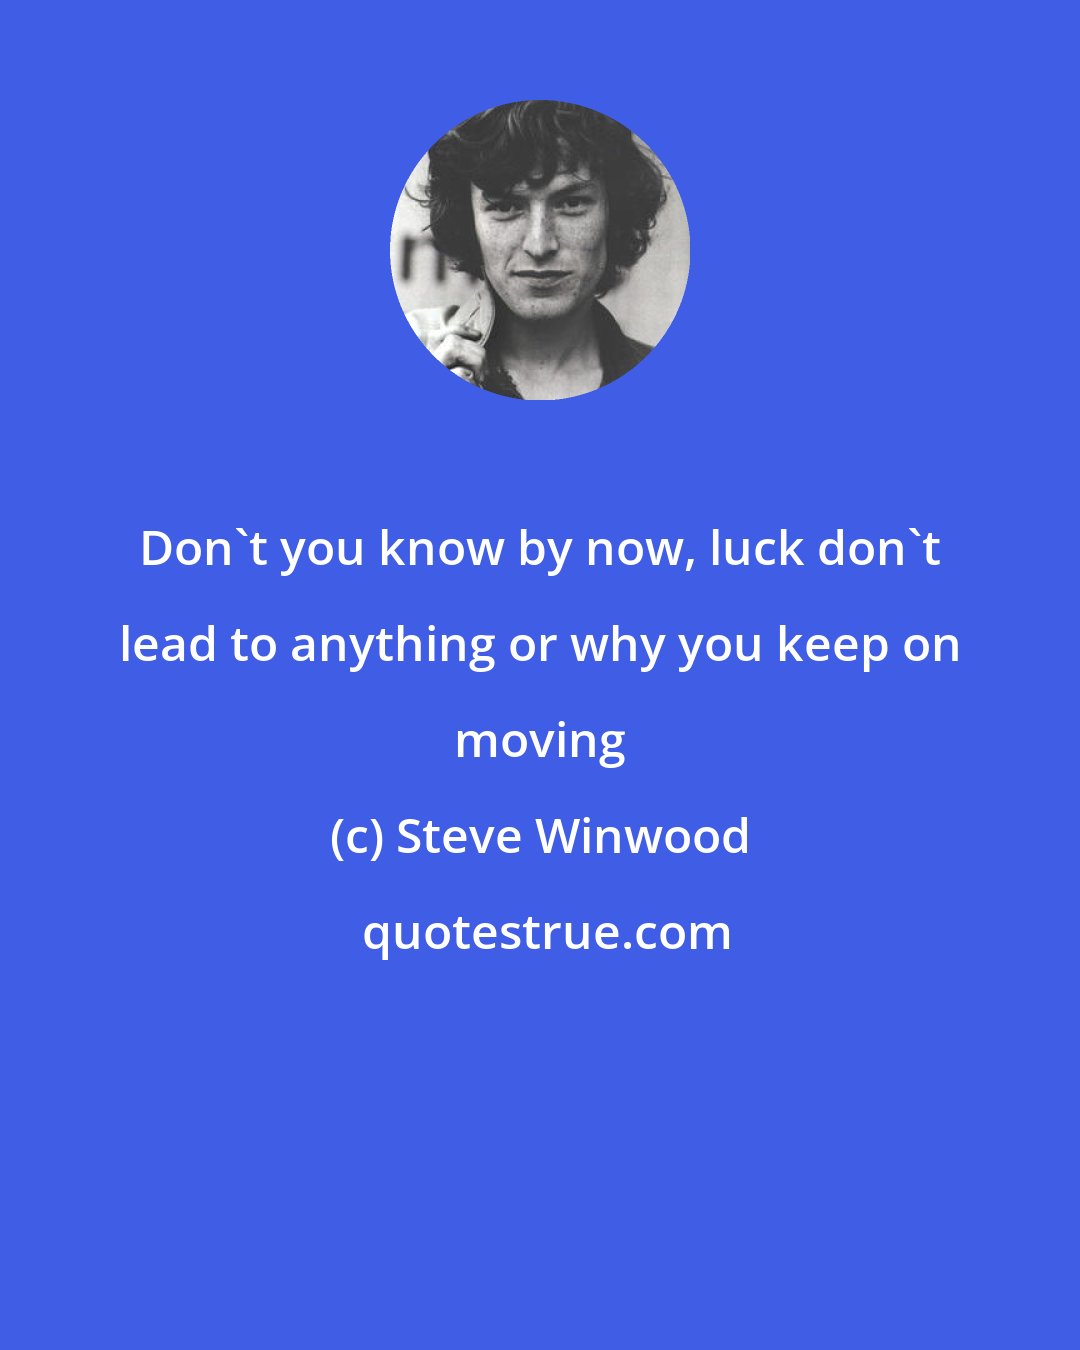 Steve Winwood: Don't you know by now, luck don't lead to anything or why you keep on moving